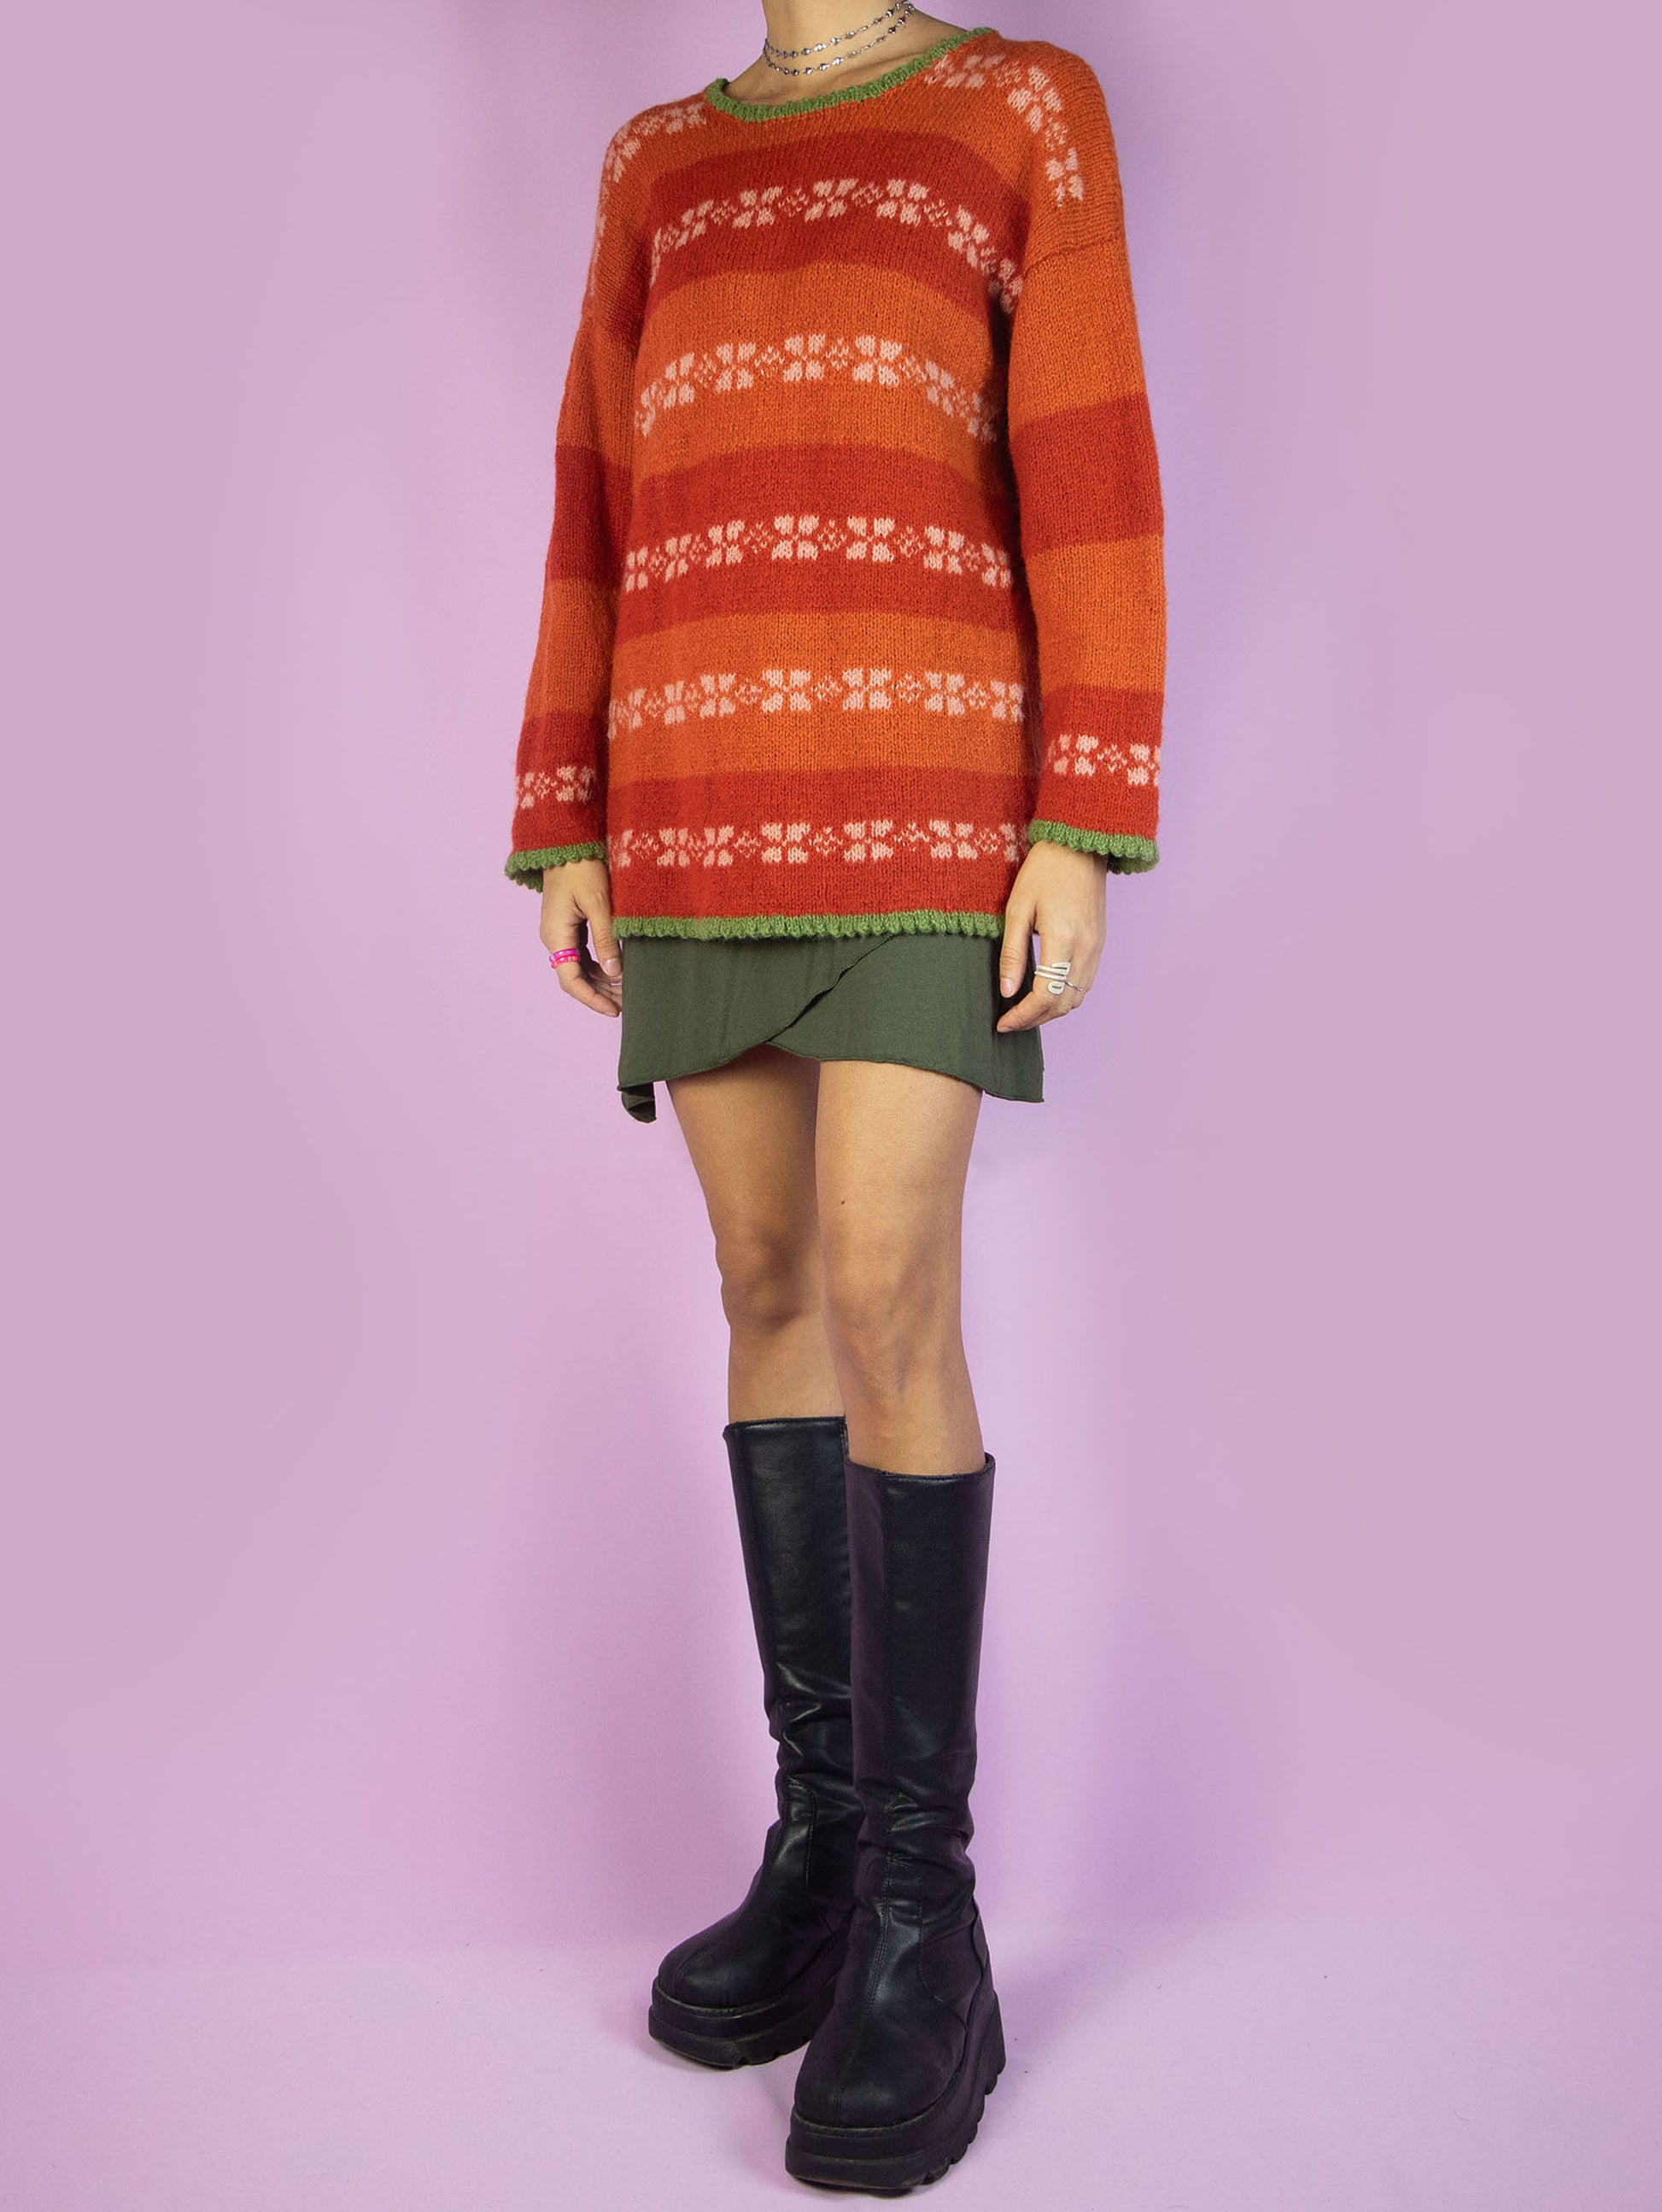 The Vintage 90s Orange Striped Sweater is a winter multicolored orange, white, and green striped pullover.